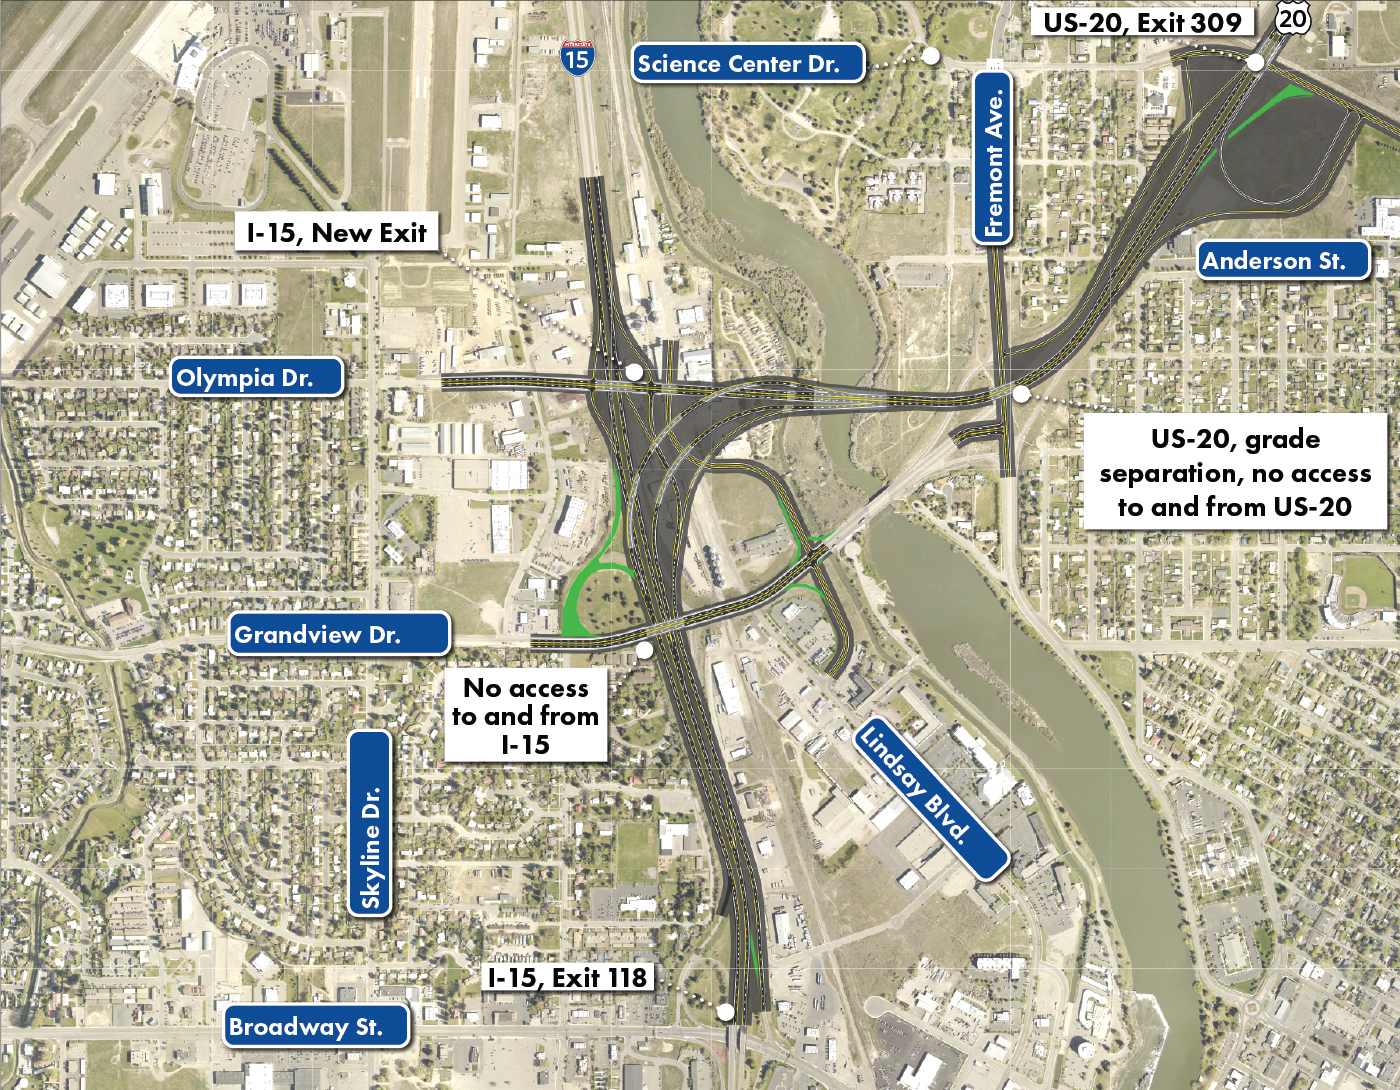 Alternative E3 Aerial map includes Roadways, Structures, and Roadway Obliterations. It also includes 7 highlighted roads: from south to north they are Science Center Drive, Fremont Ave., Anderson St., Olympia Dr., Grandview Dr., Skyline Fr., Lindsay Blvd., and Broadway St. I-15, Exit 118 and US-20 and Exit 309 are also called out. US-20, grade separation, no access to and from US-20 at Fremont Ave. is called out on the map. A call-out showing no access to and from I-15 is called out on the map at Grandview Dr. There is a new exit at 1-15 and Olympia Drive. The Alternative area is featured with the notations of the roadway obliterations.